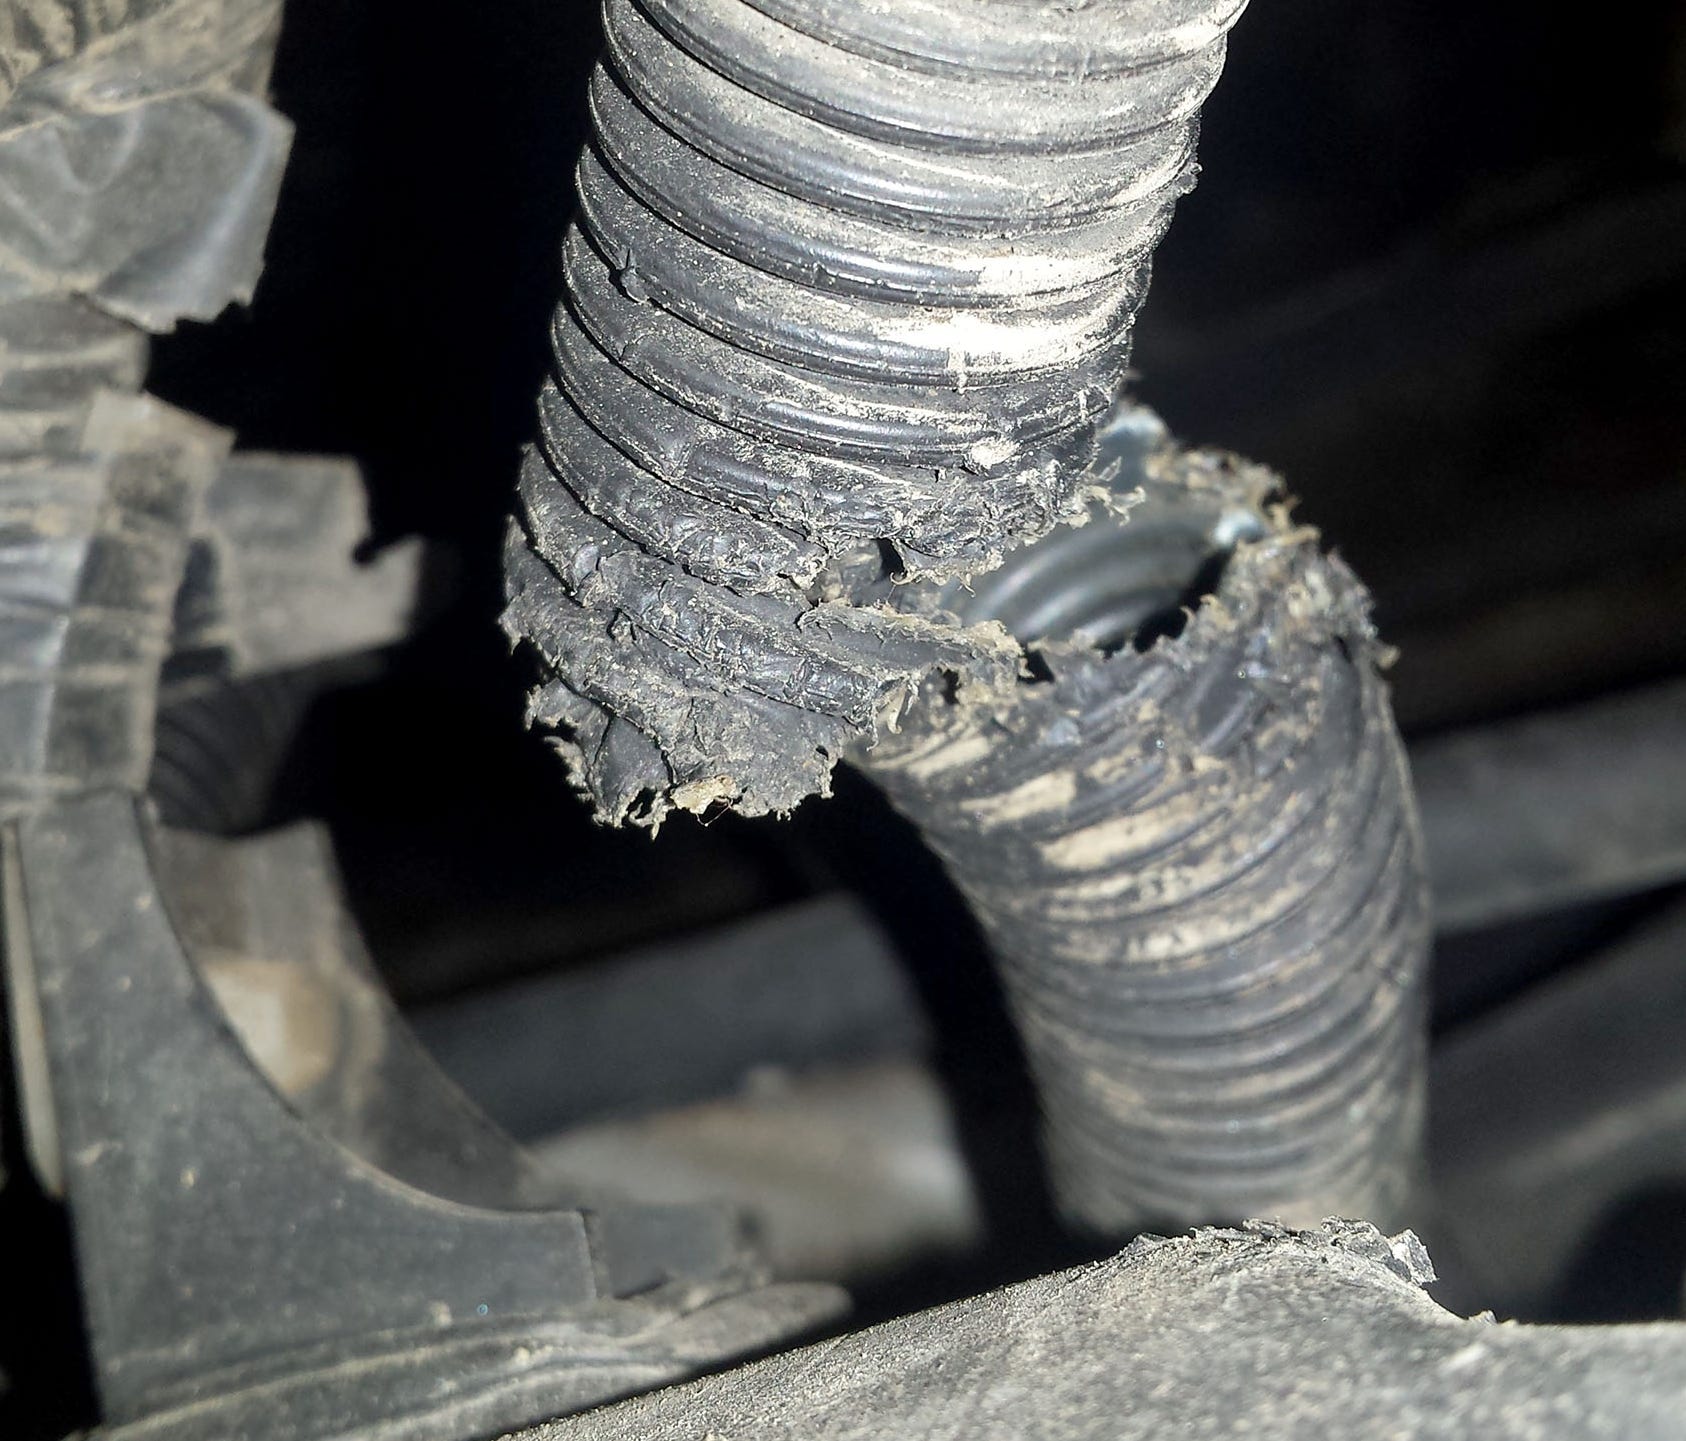 Albert Heber of Indiana owned a 2012 Toyota Tundra and had its soy-based insulated wiring chewed through by rodents three times, the first in 2013. Total damages were about $1,500 -- damages that attorney Brian Kabateck said Toyota wouldn't cover und